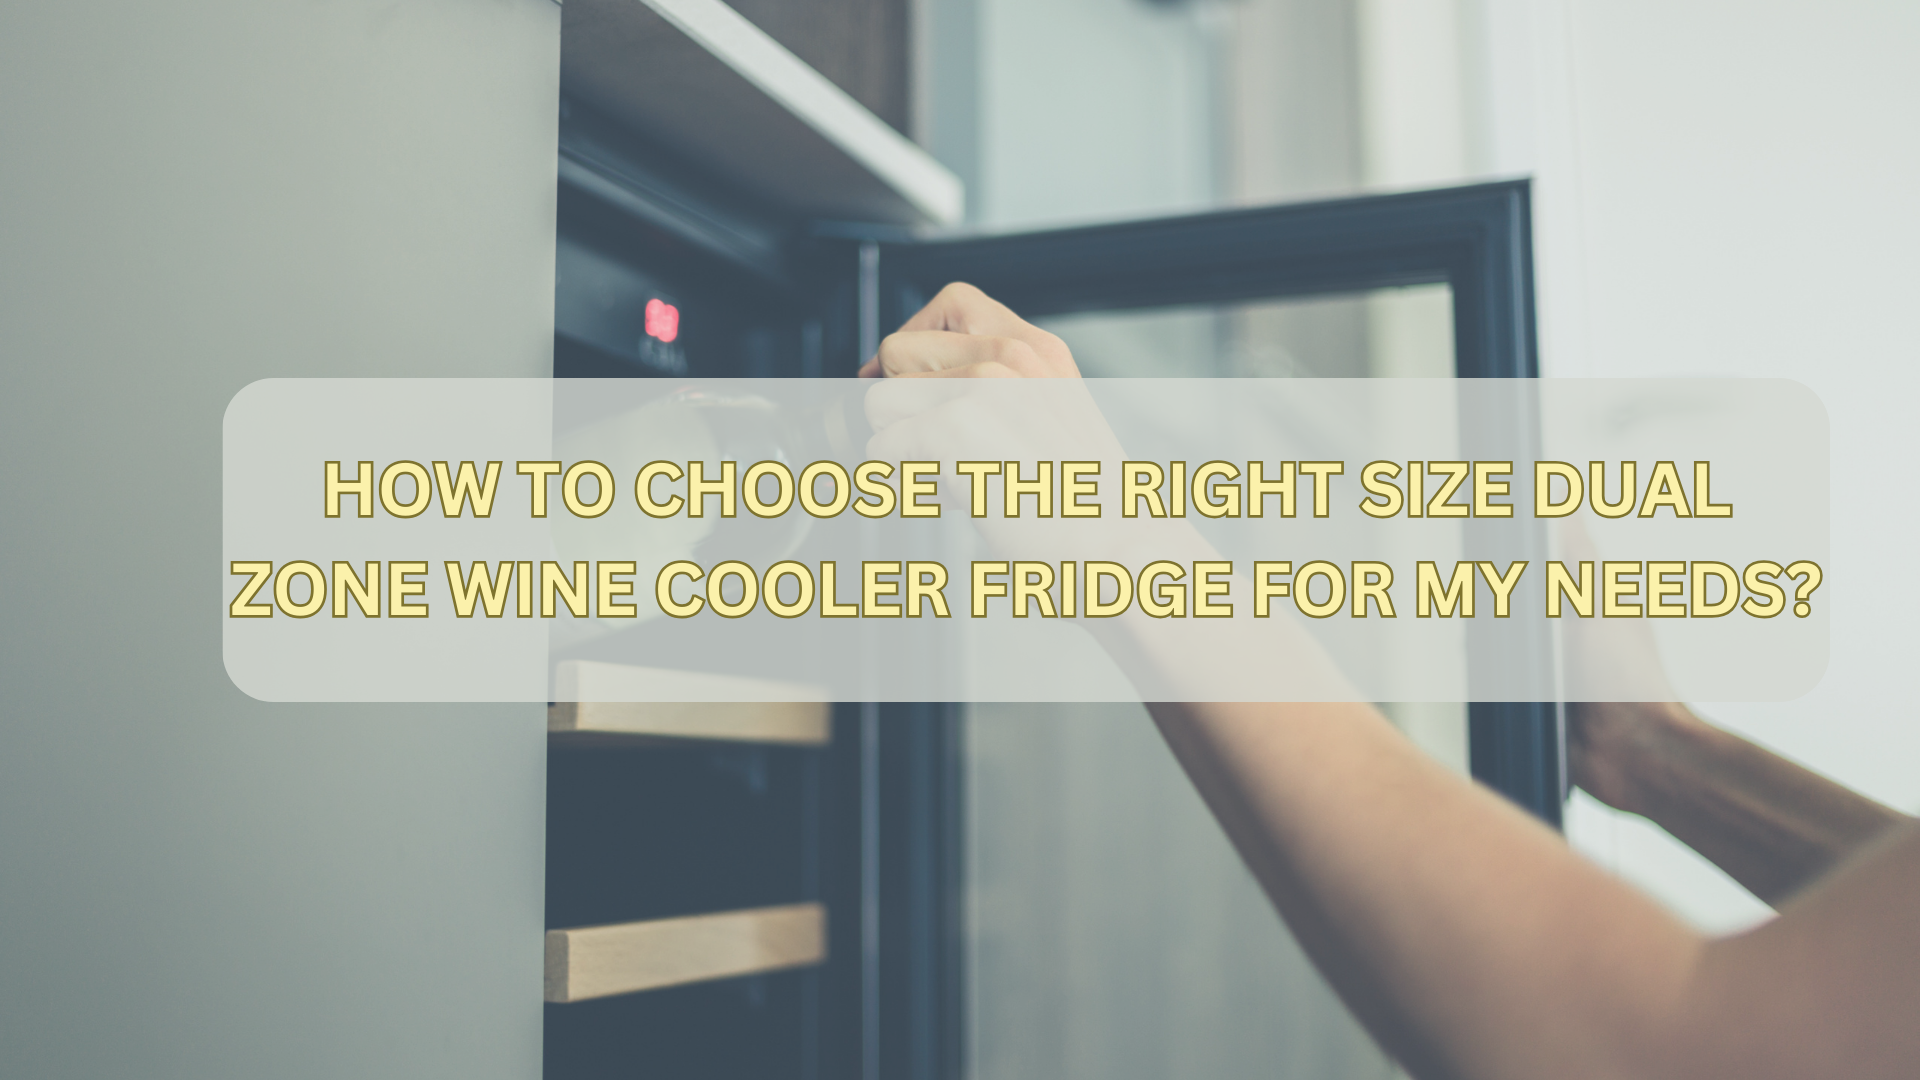 How to choose the right size dual zone wine cooler fridge for my needs